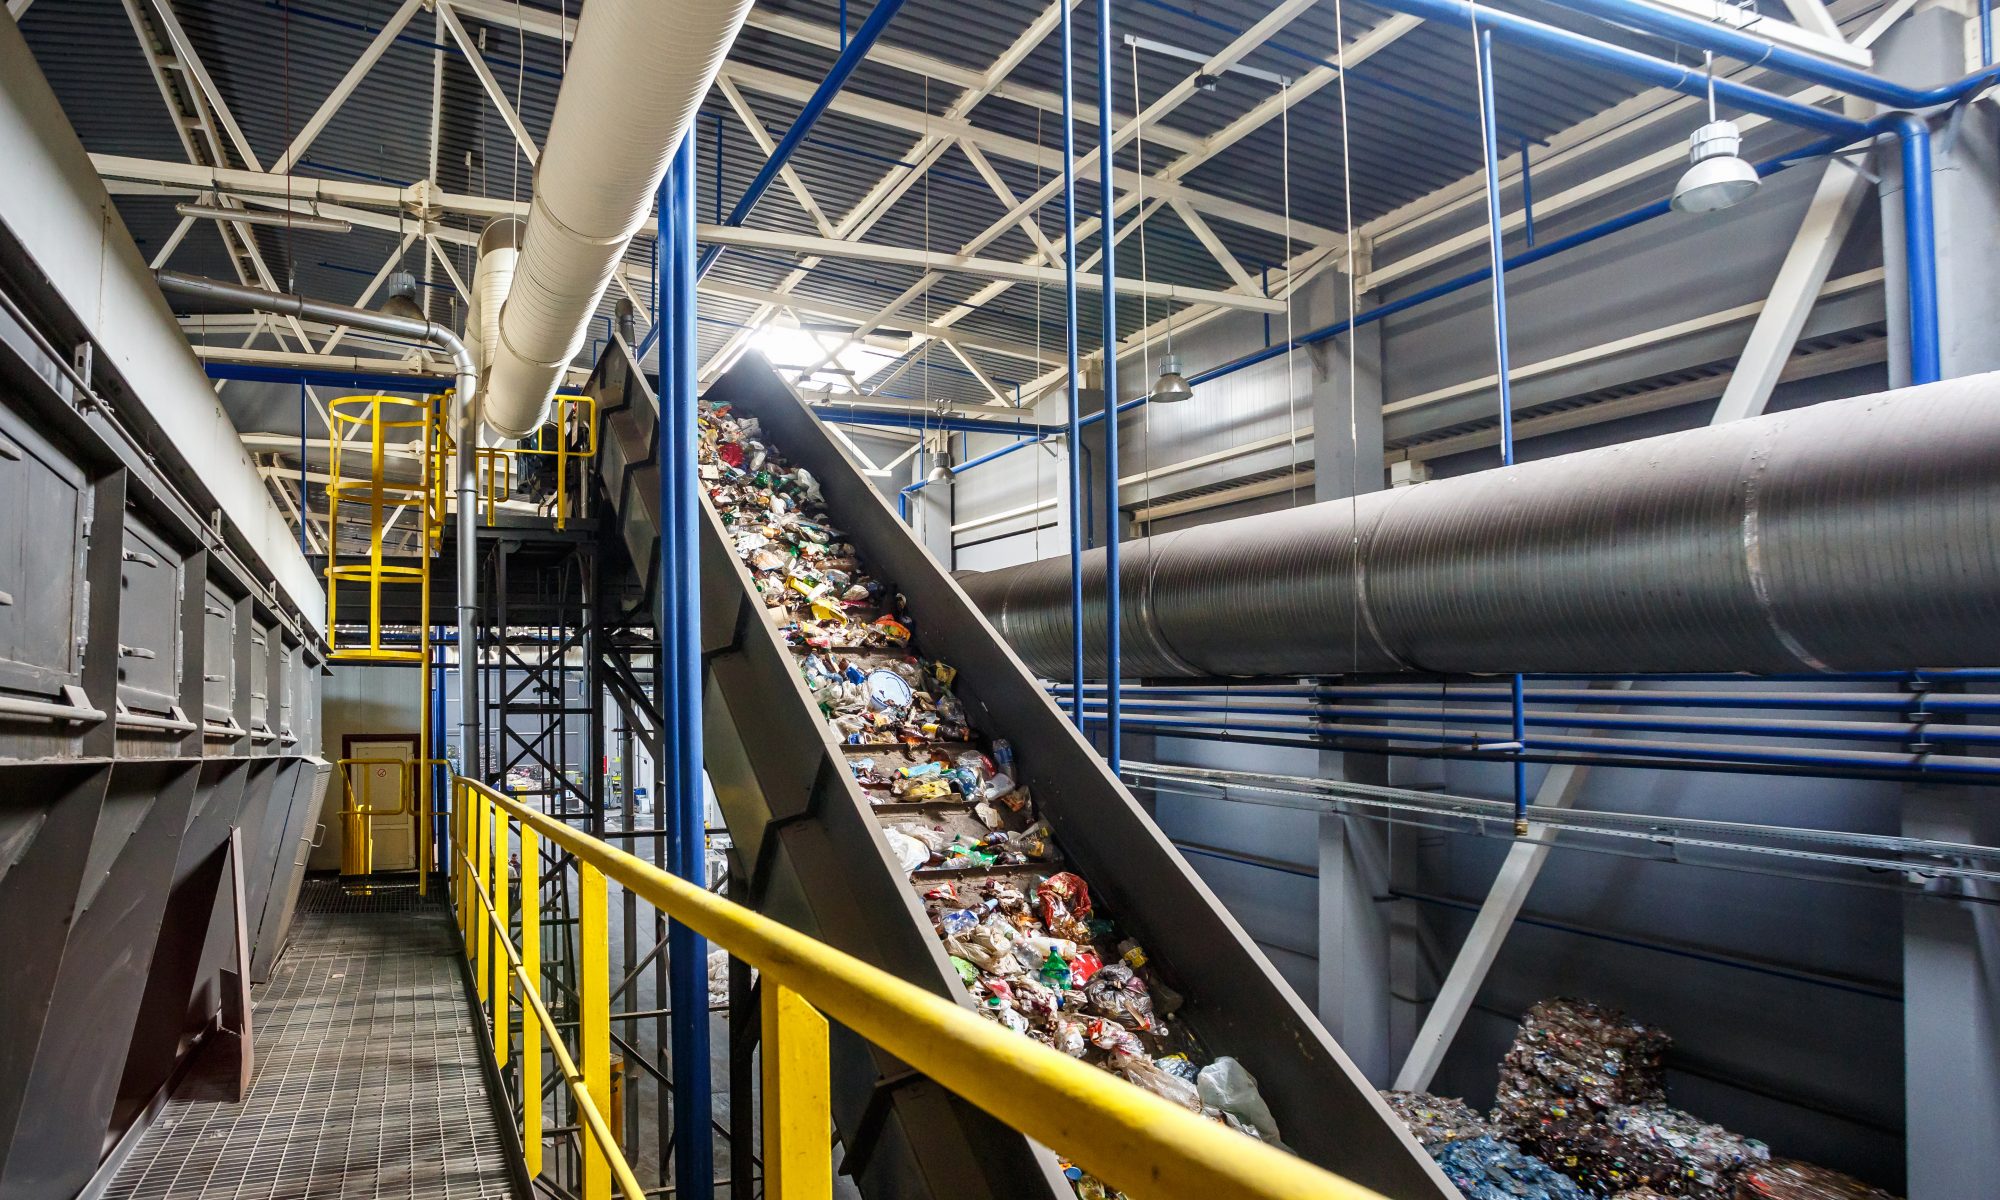 plastic moving down a conveyer belt in a recycling plant